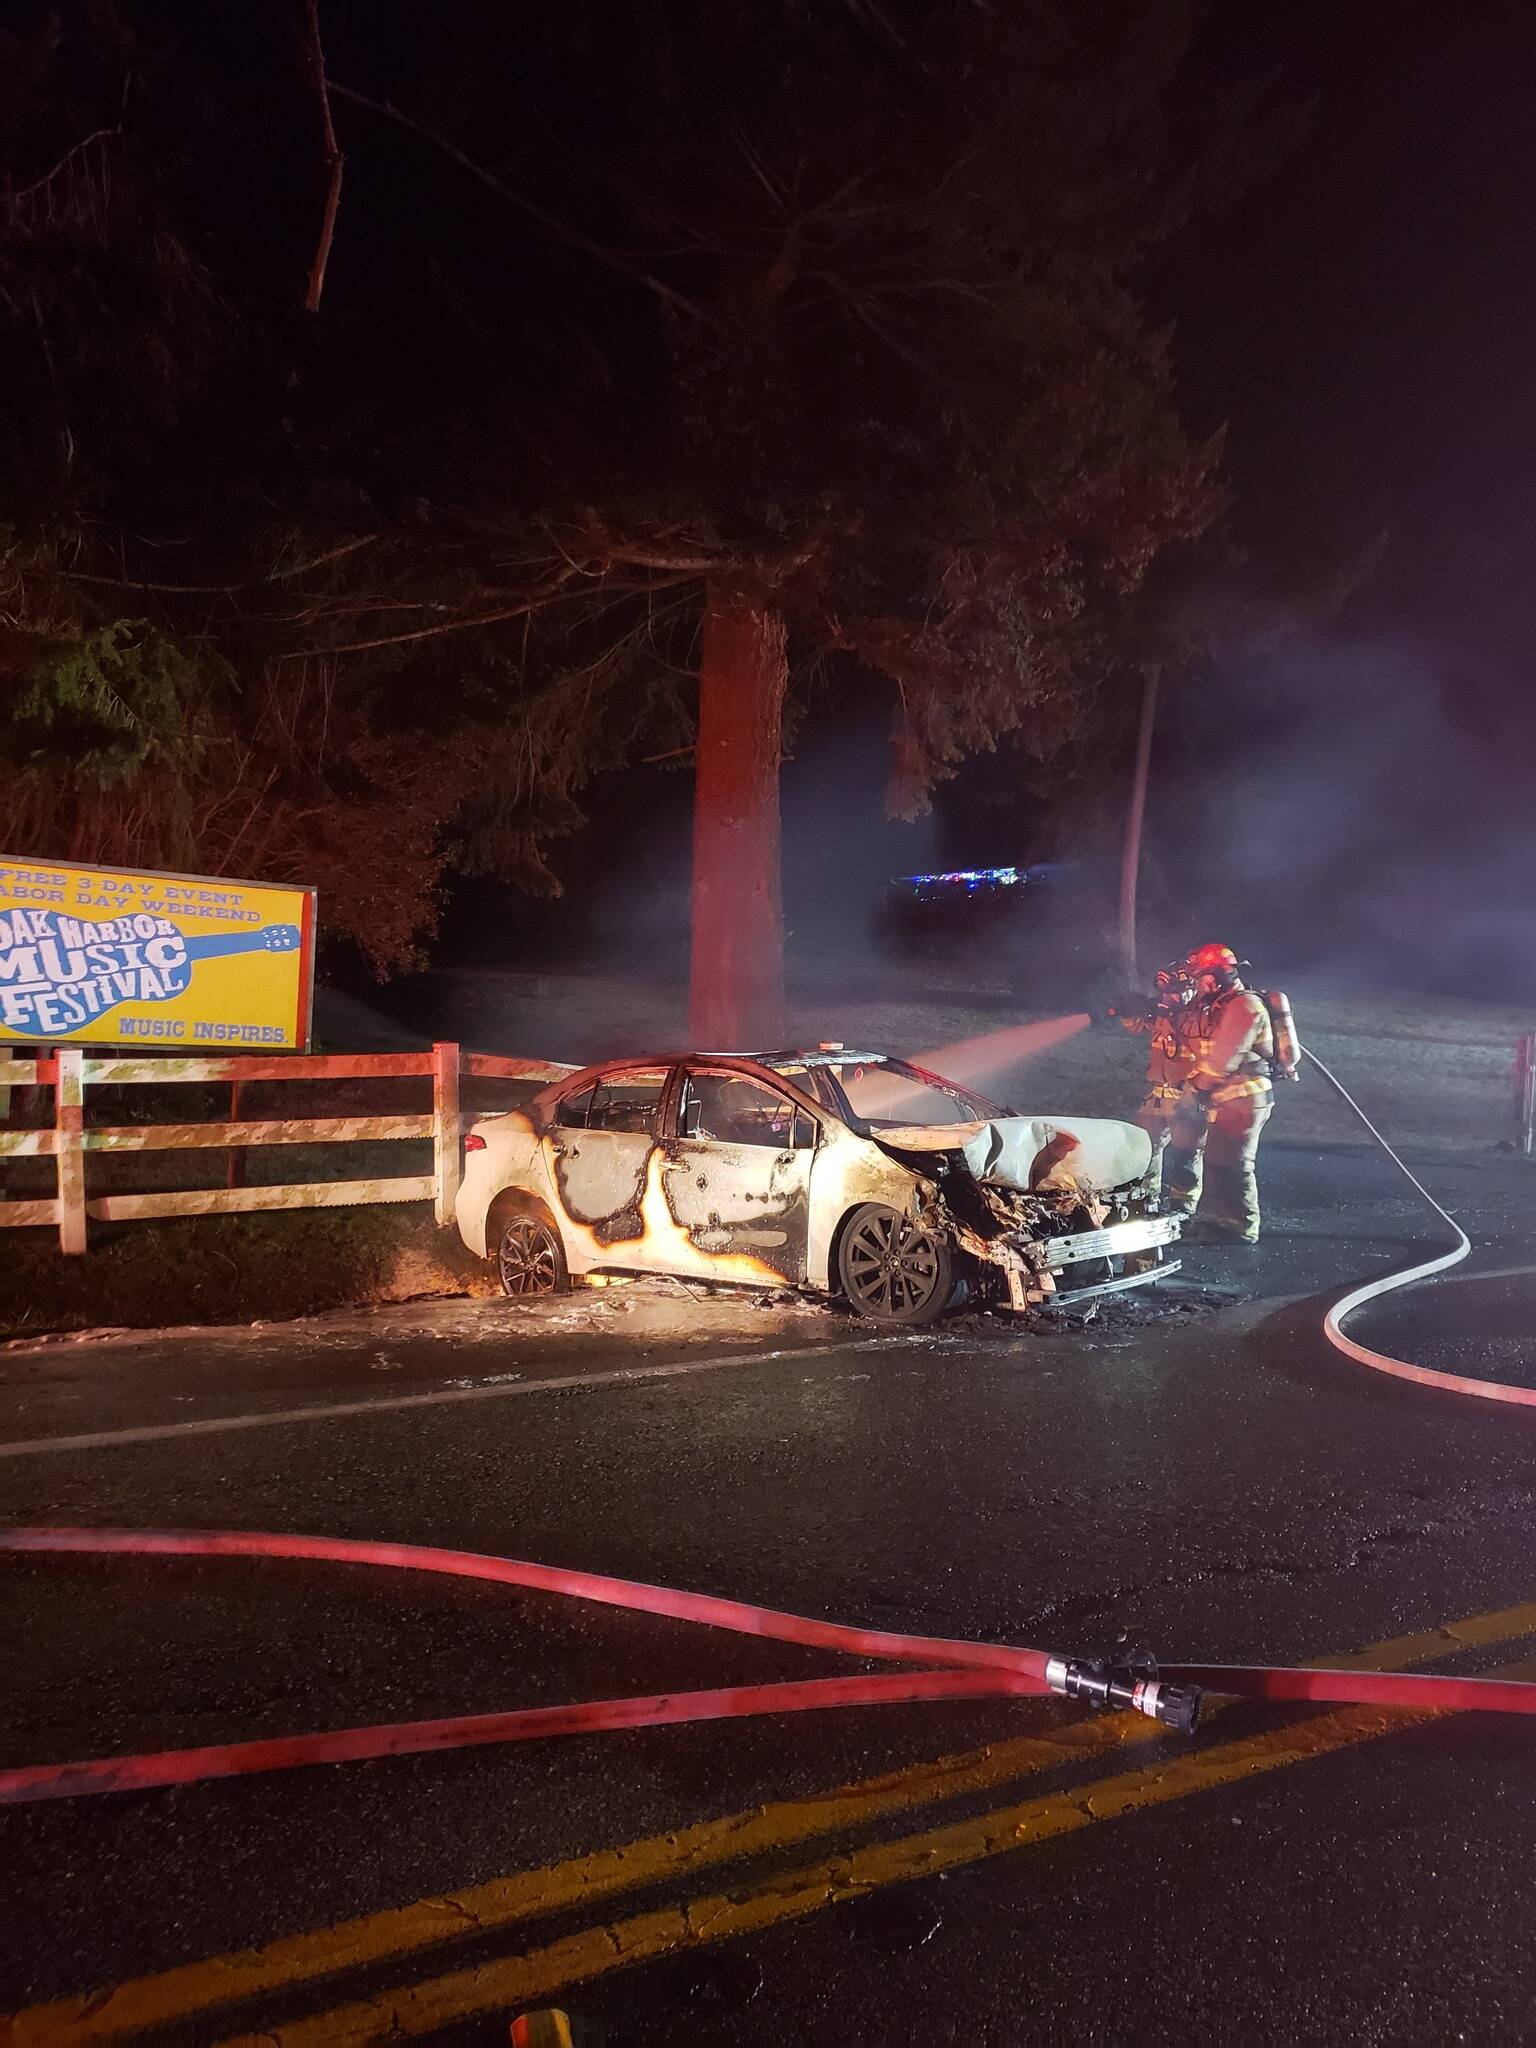 North Whidbey Fire and Rescue firefighters put out a car fire early Wednesday morning. (Photo provided)